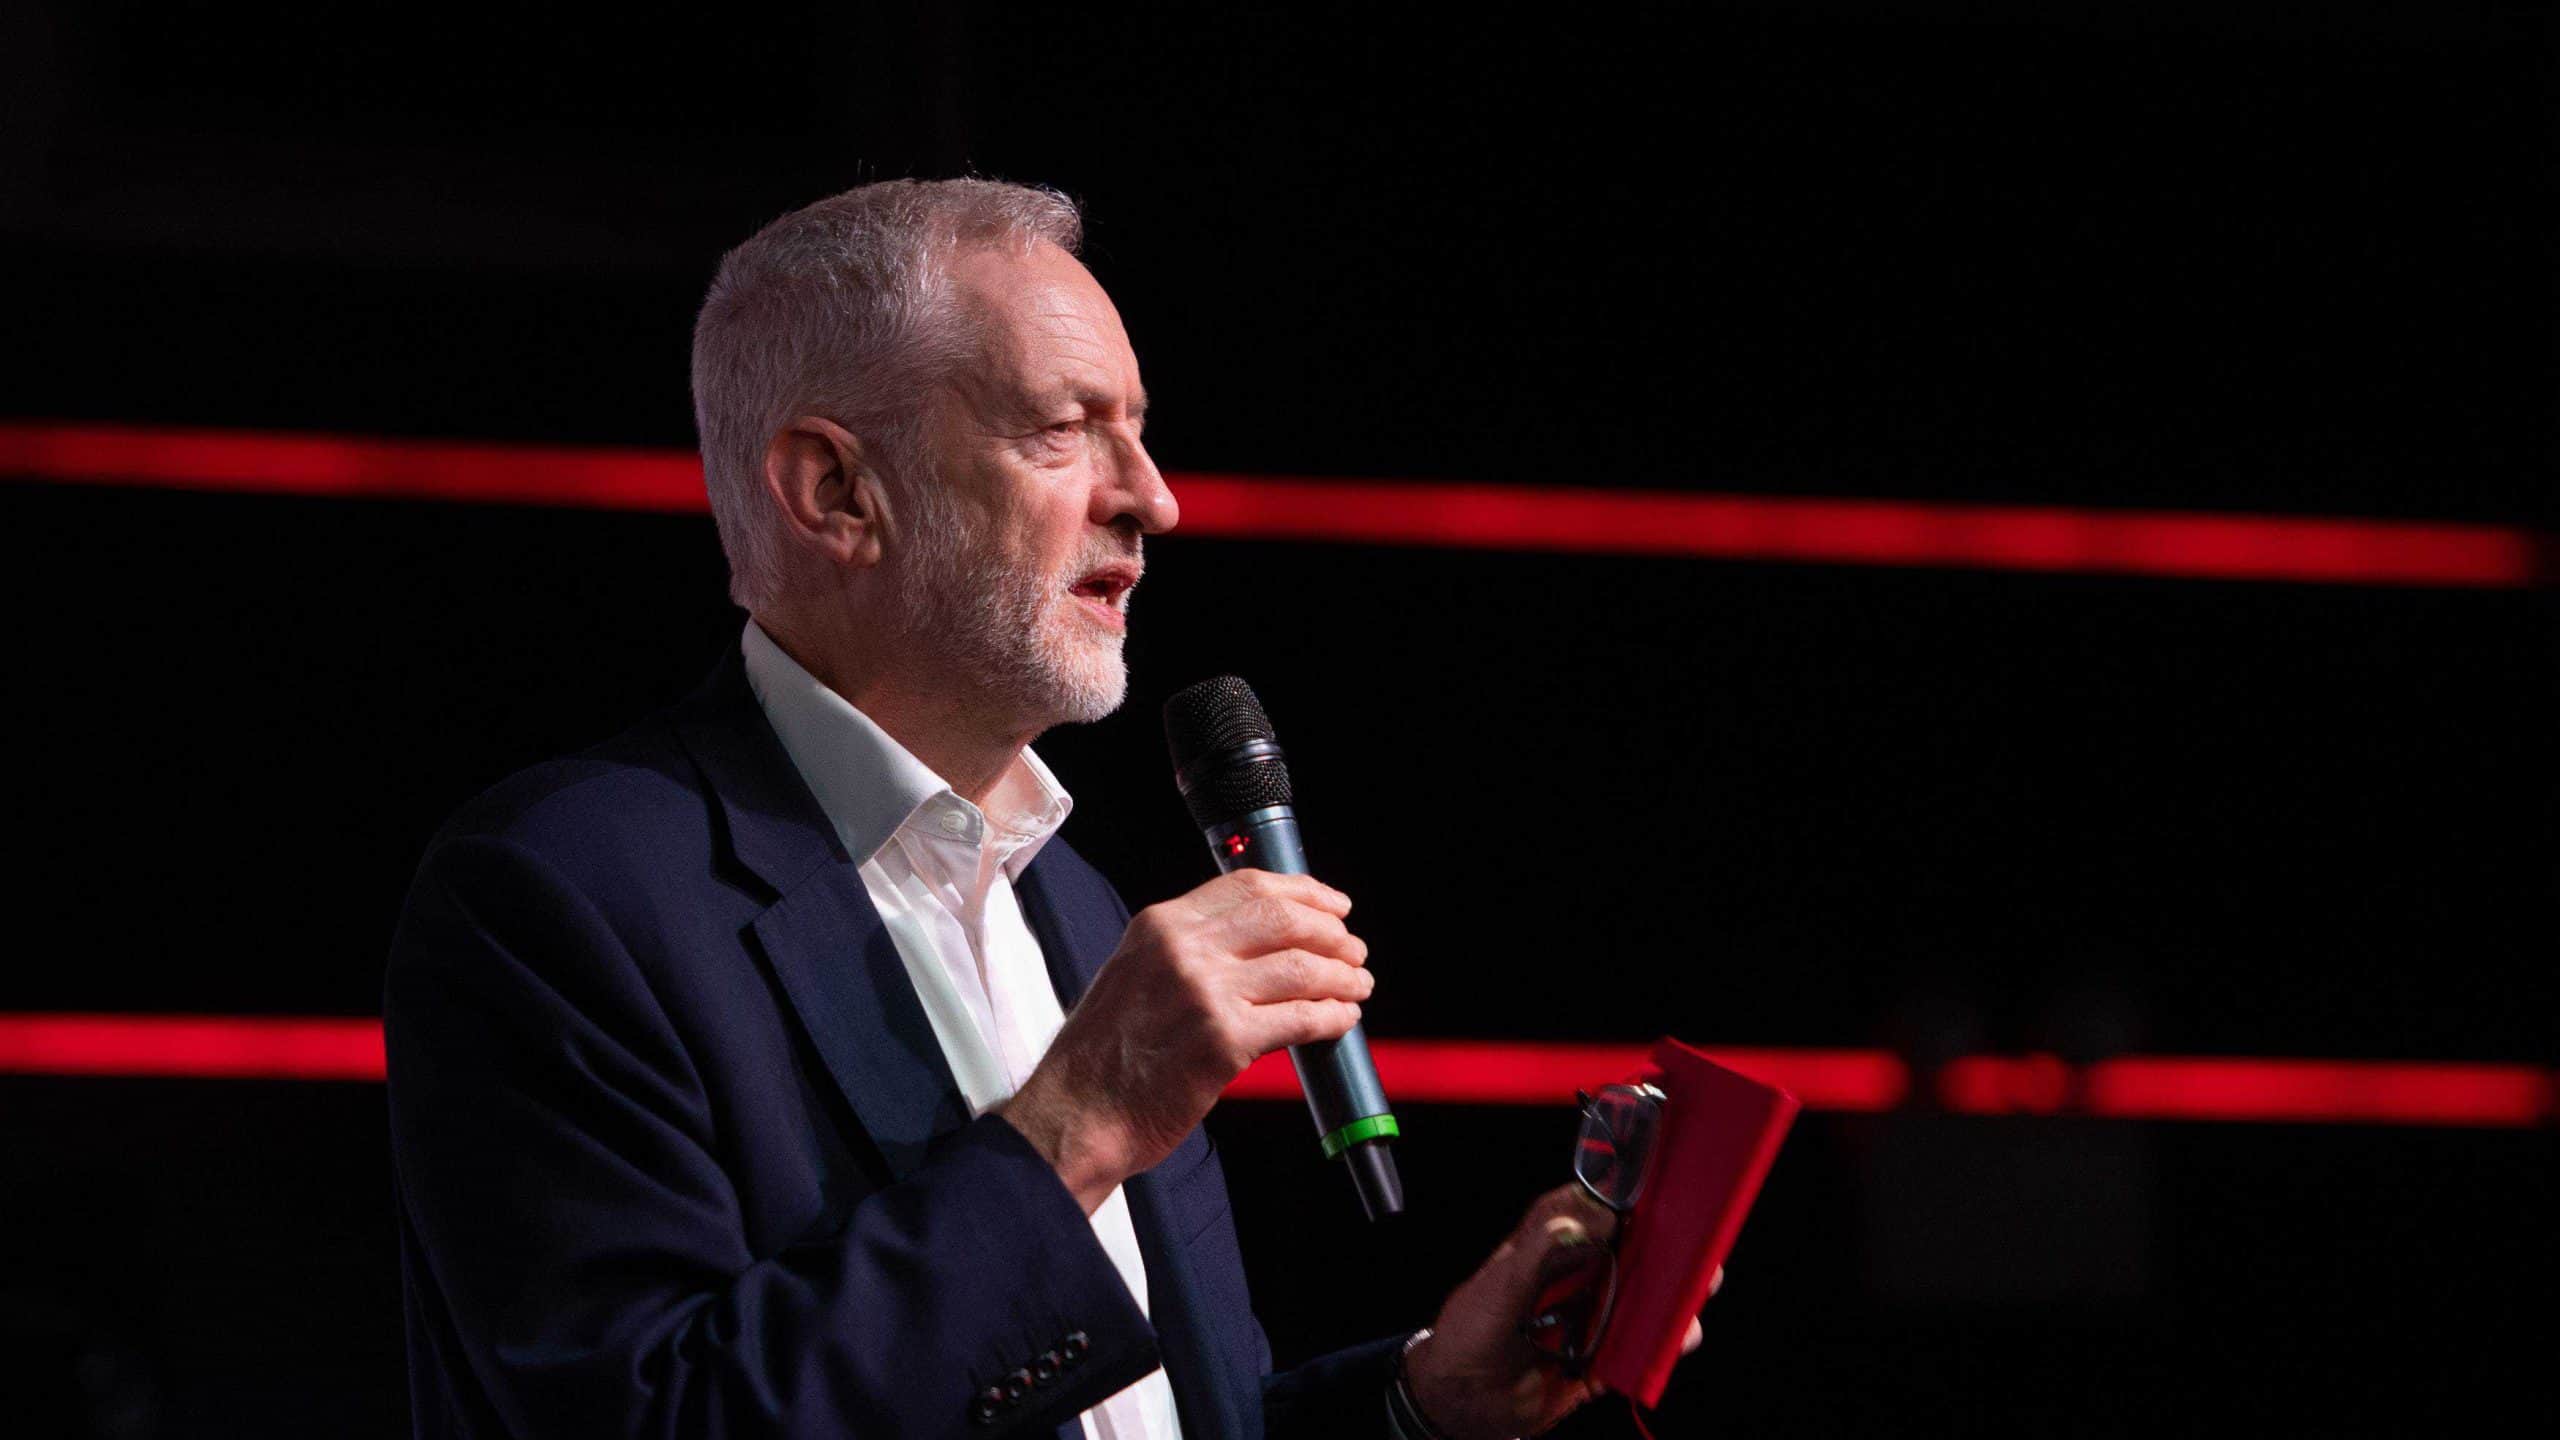 Corbyn addresses packed student union as he unveils youth manifesto